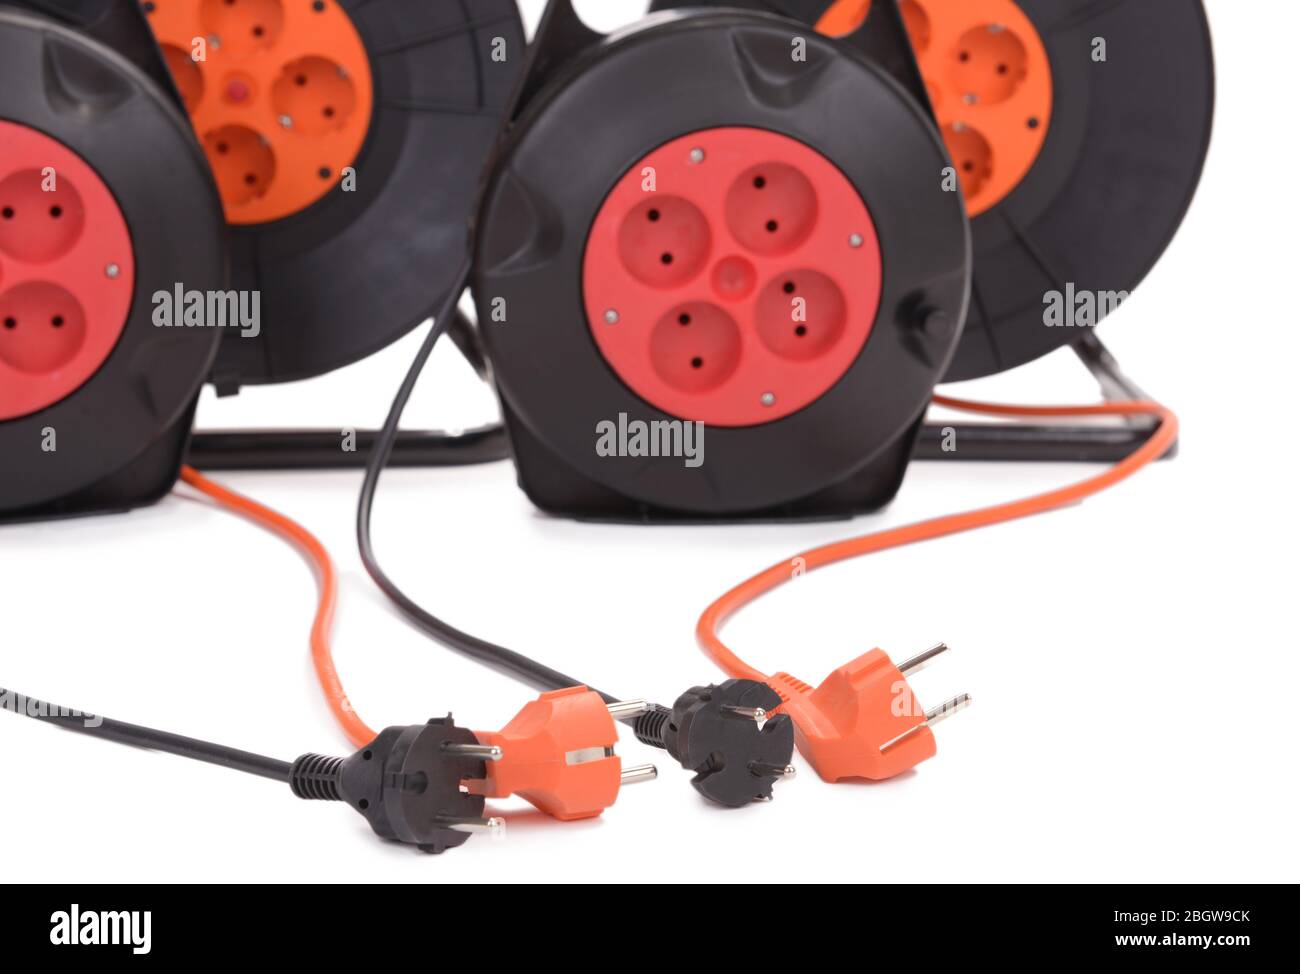 Cable reel cable reels -Fotos und -Bildmaterial in hoher Auflösung - Seite  2 - Alamy